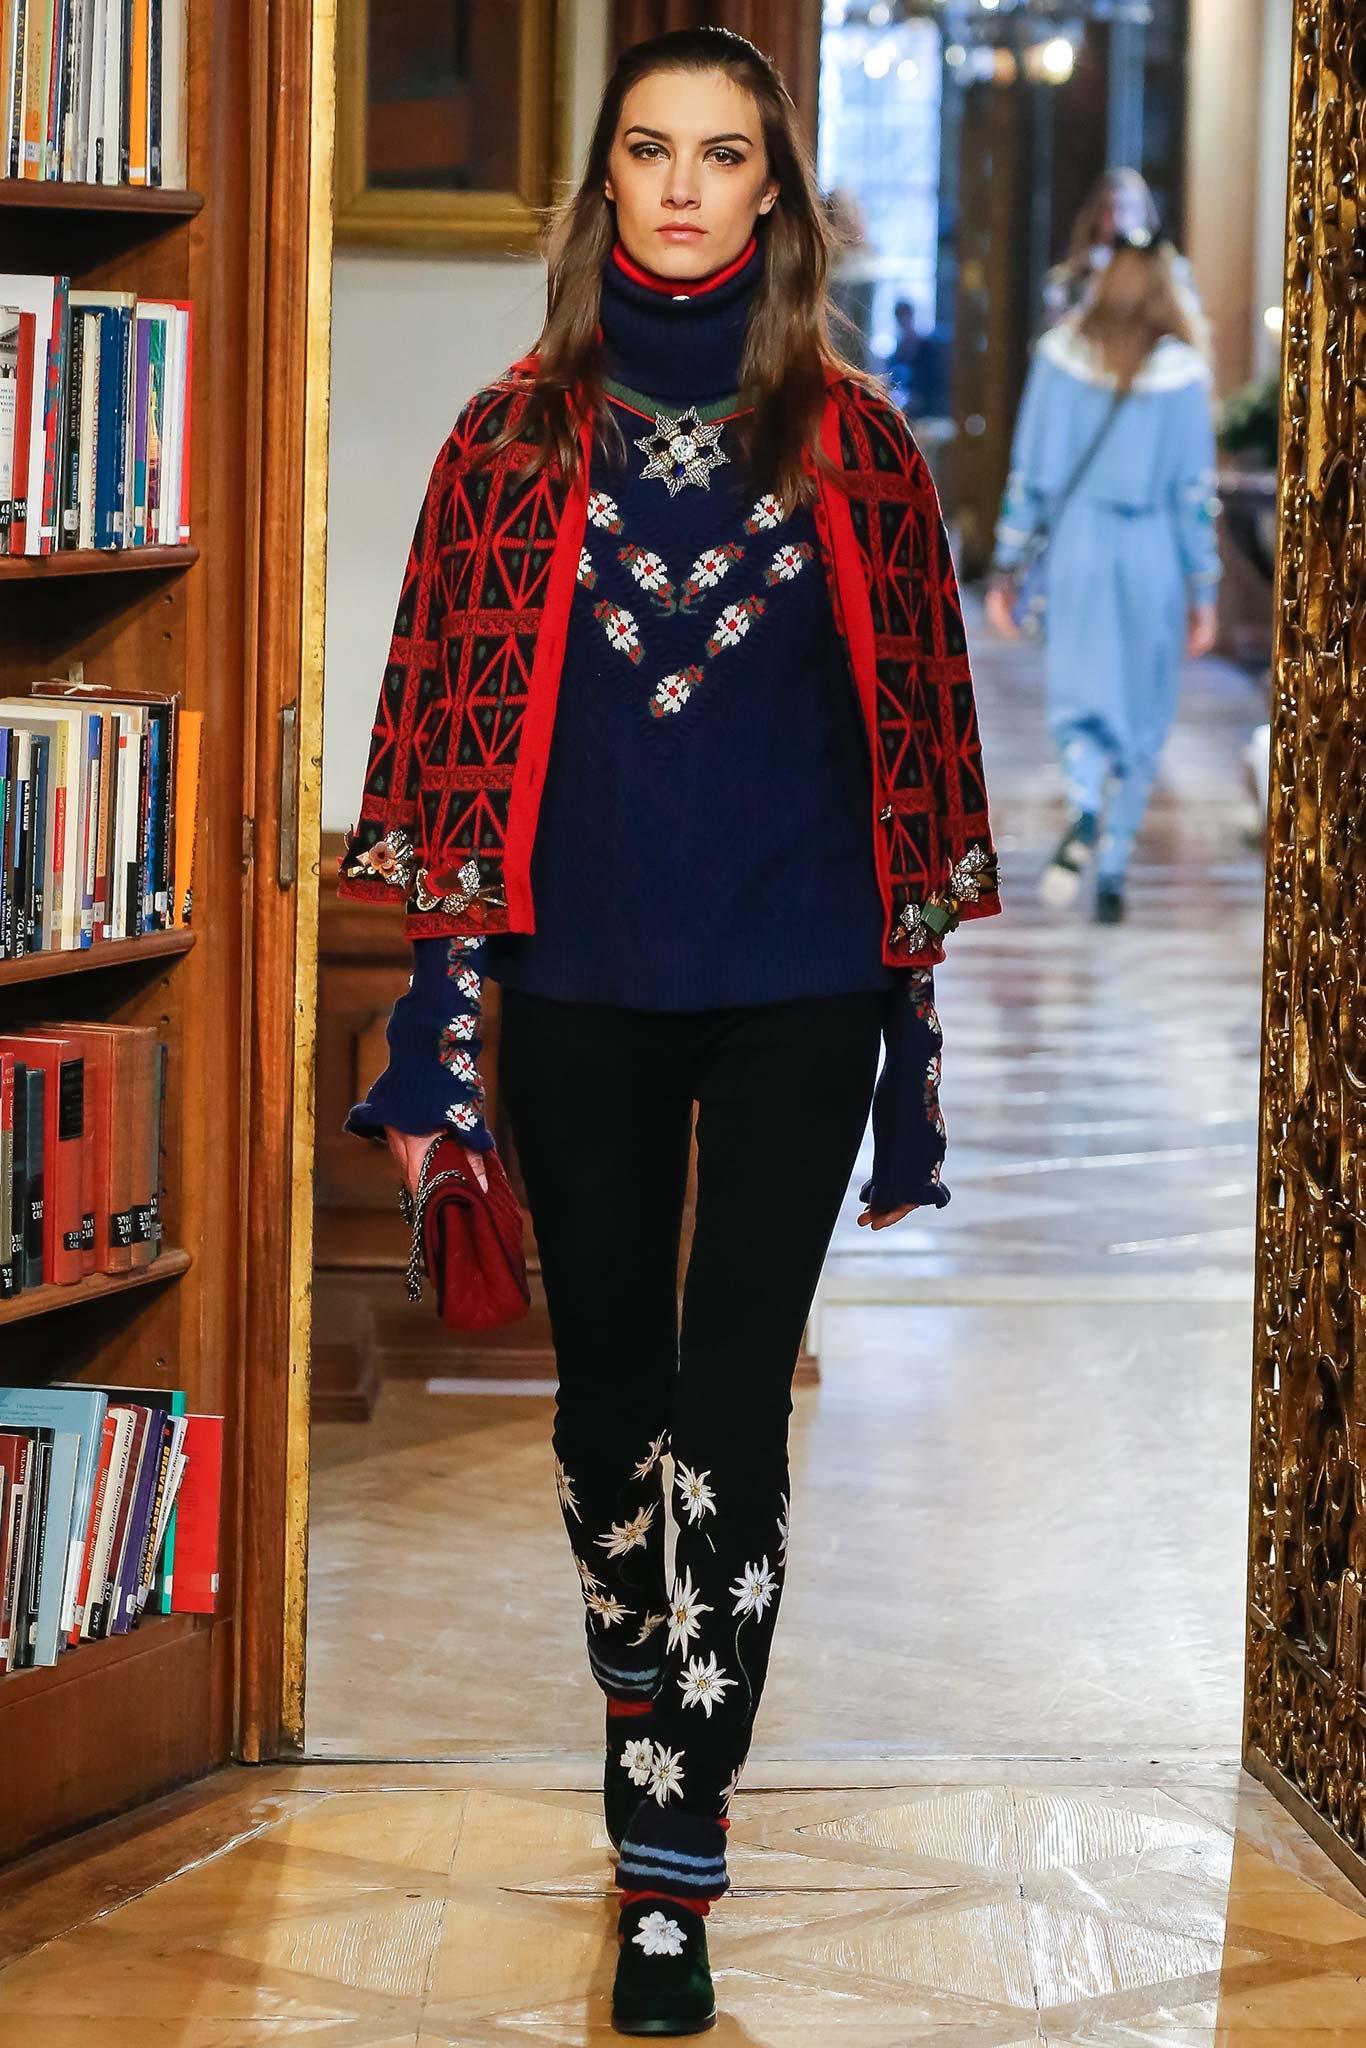 New stunning Chanel cashmere cardi jacket from Runway of Paris / SALZBURG Metiers d'Art Collection 2015 Pre-Fall.
Retail price ca. 4,700$
- Made of 100% pure cashmere with alpine intarsia motif
- CC logo magnifique jewel buttons: allusion to